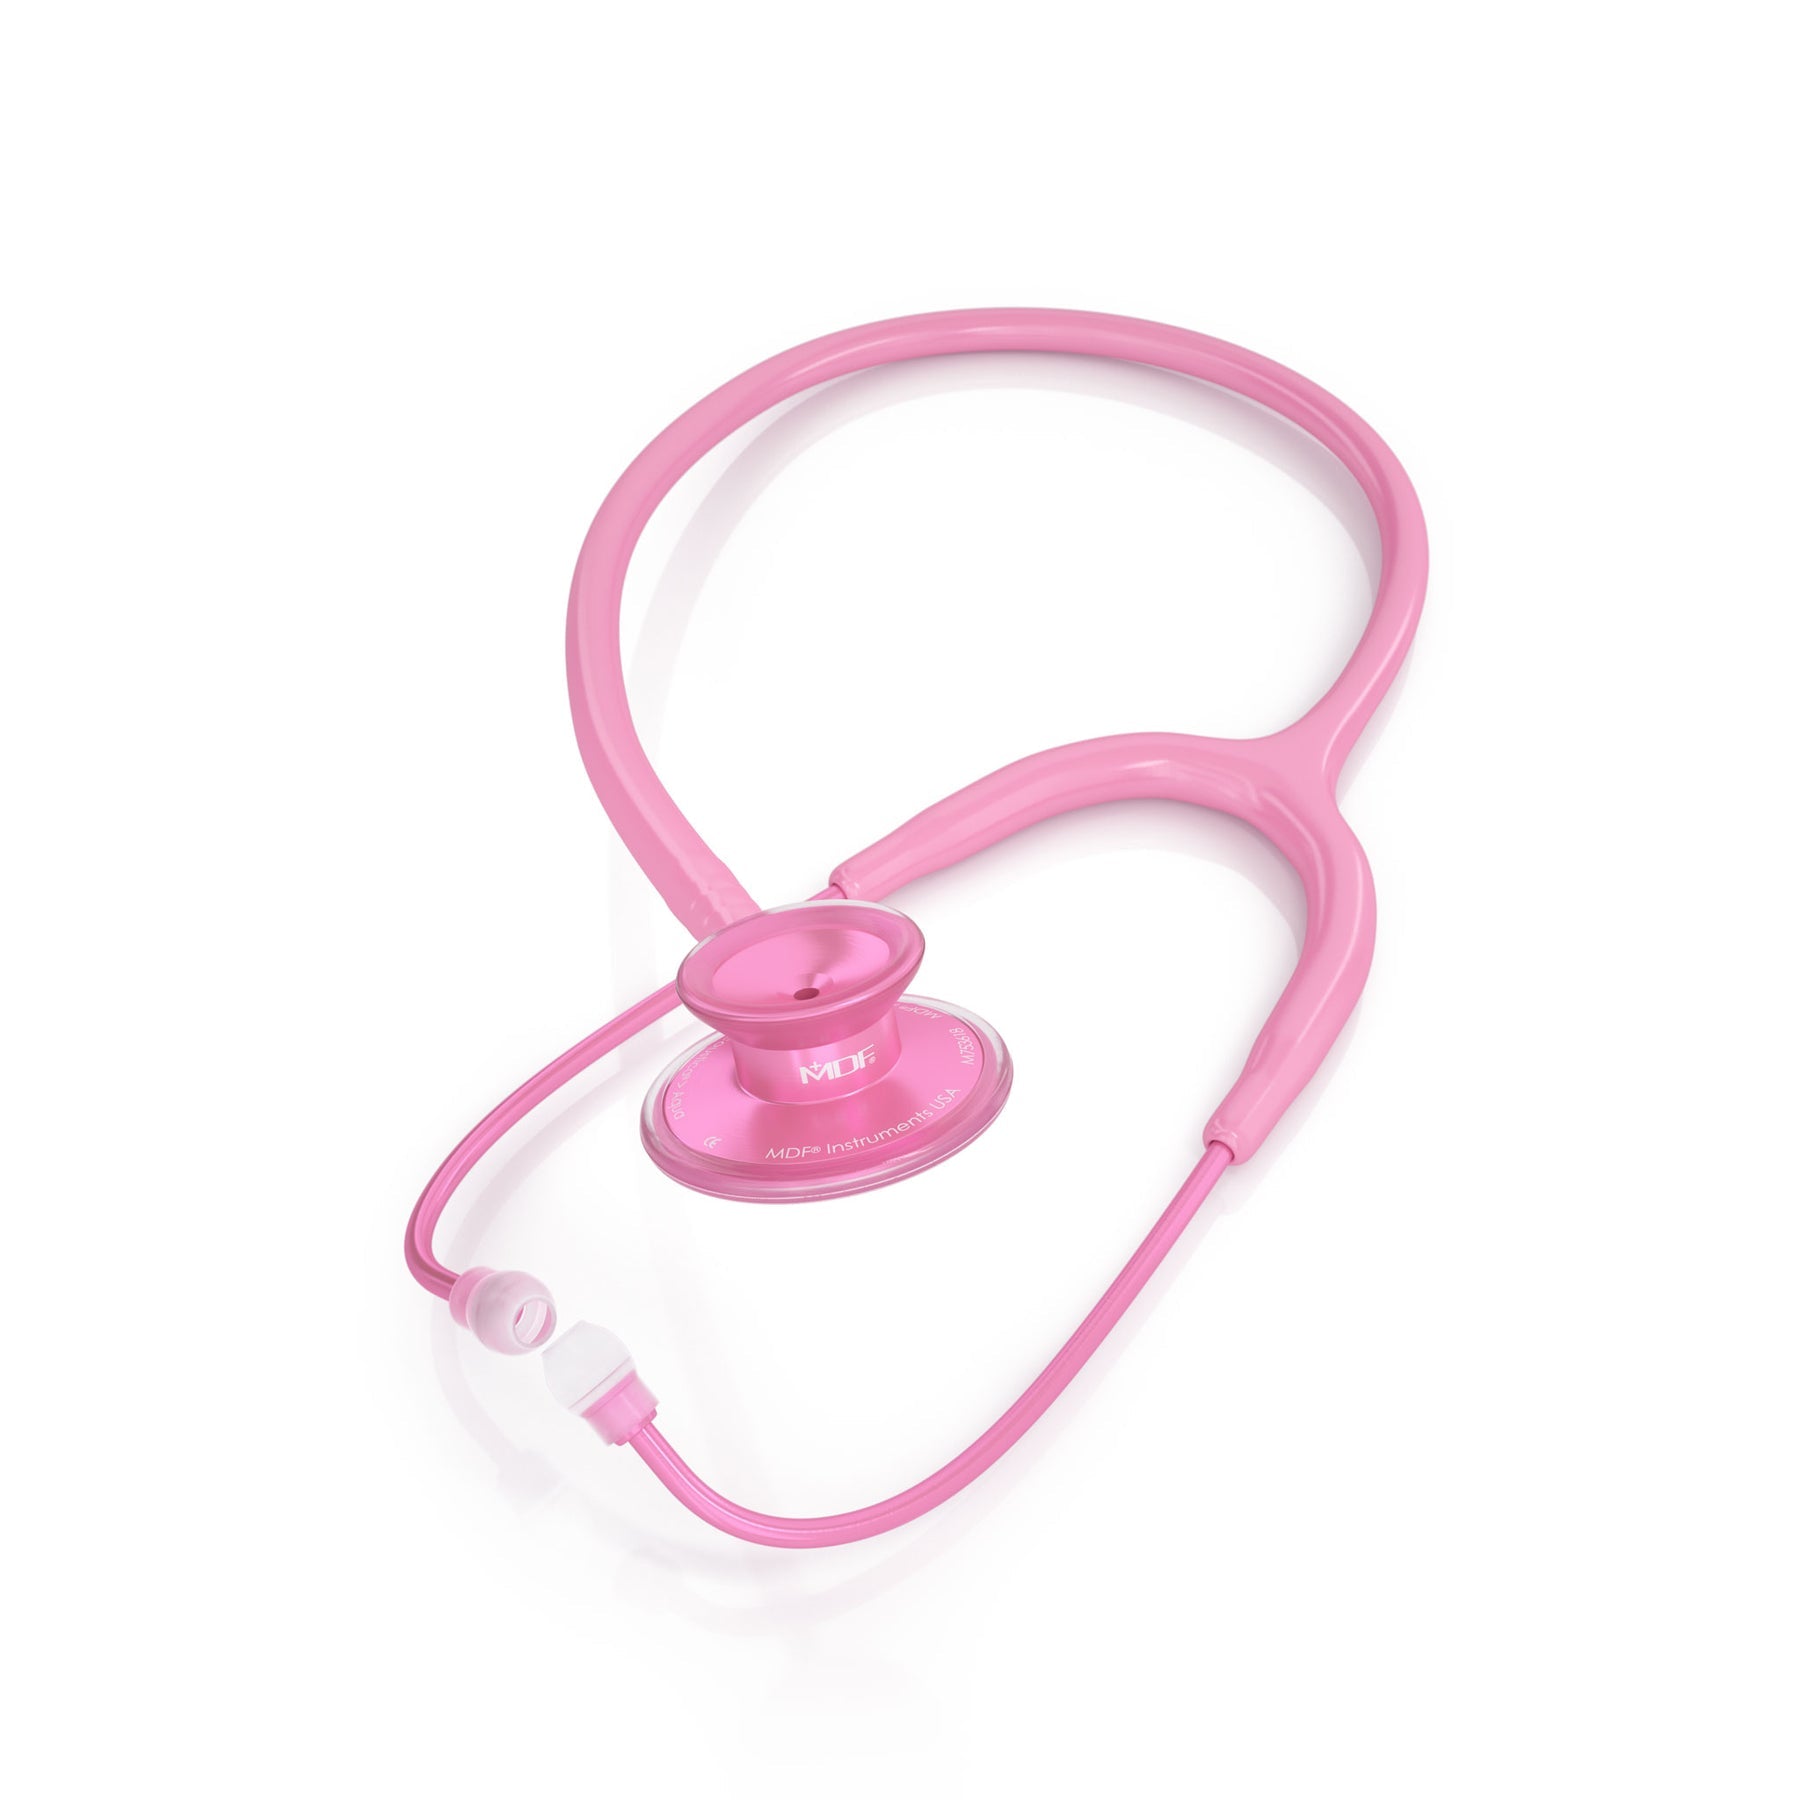 ACOUSTICA® PINK STETHOSCOPE PINKORE AND COSMO